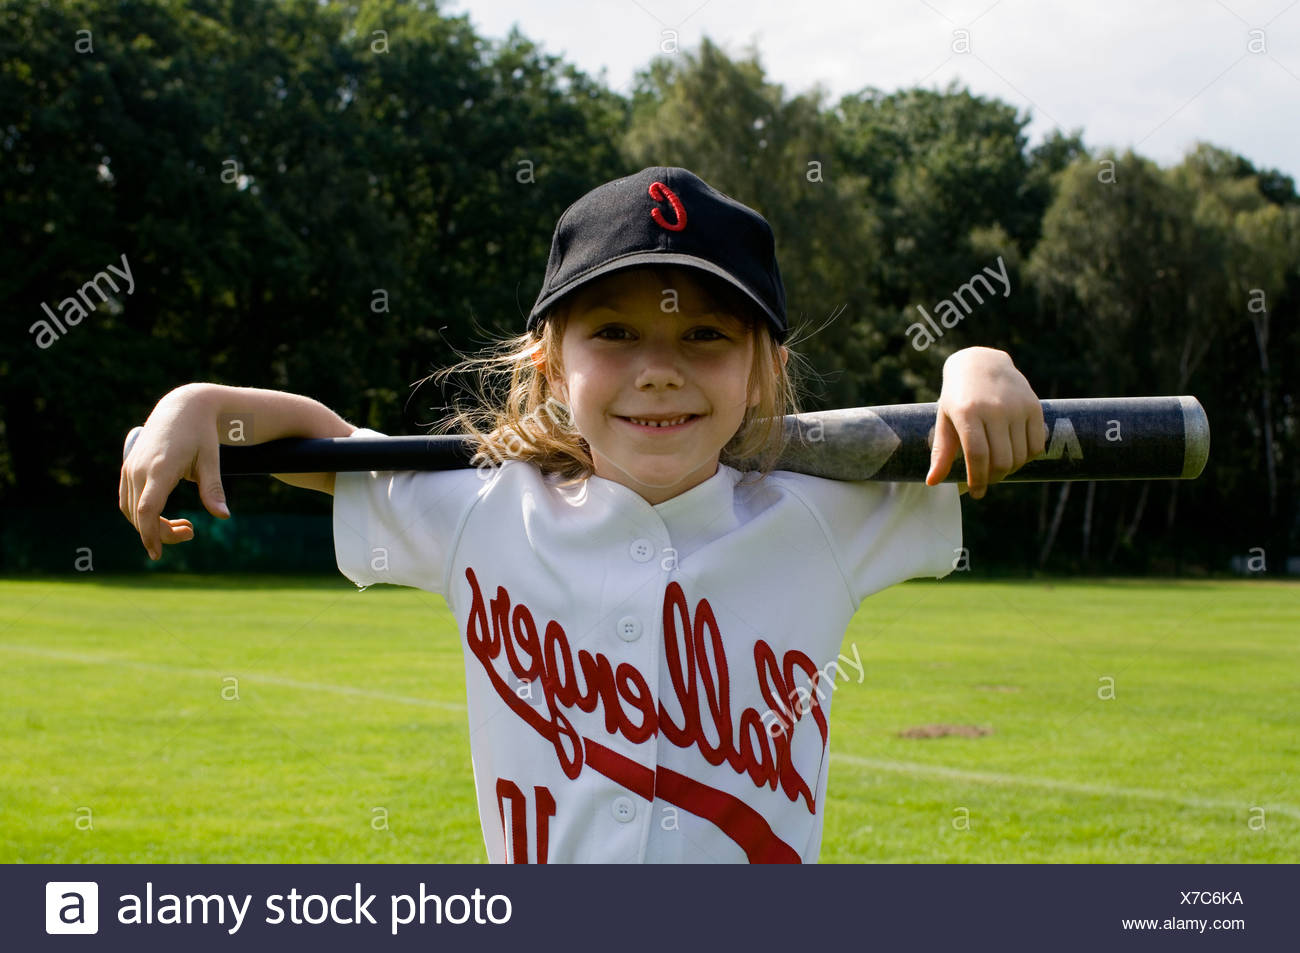 A young girl holding a baseball bat on her shoulders Stock Photo - Alamy